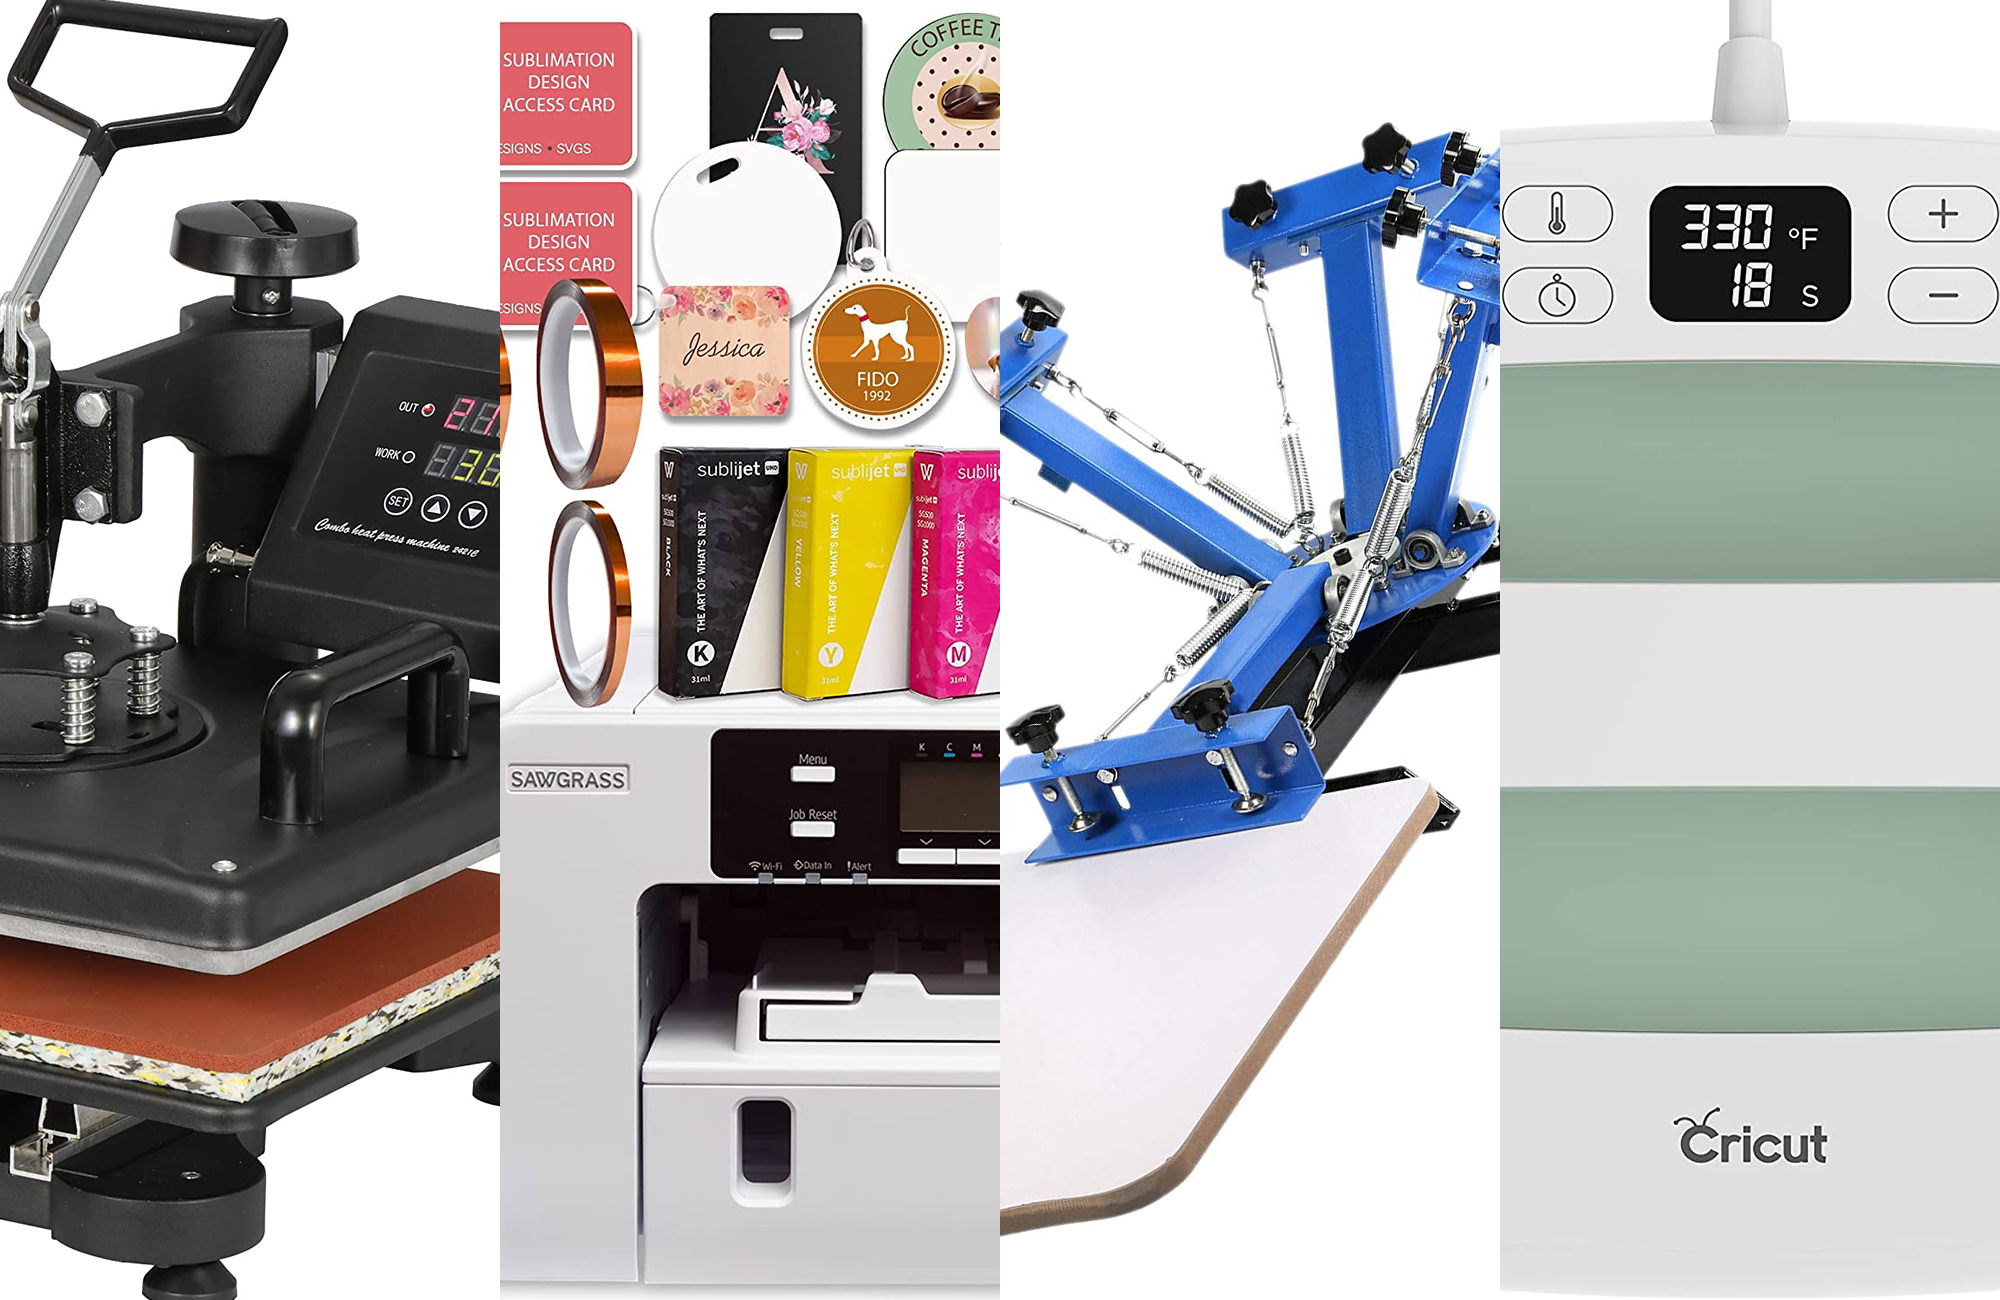 The Ultimate Heat Press Comparison: Which of these Heat Presses is Best for  Your Needs and Budget? 